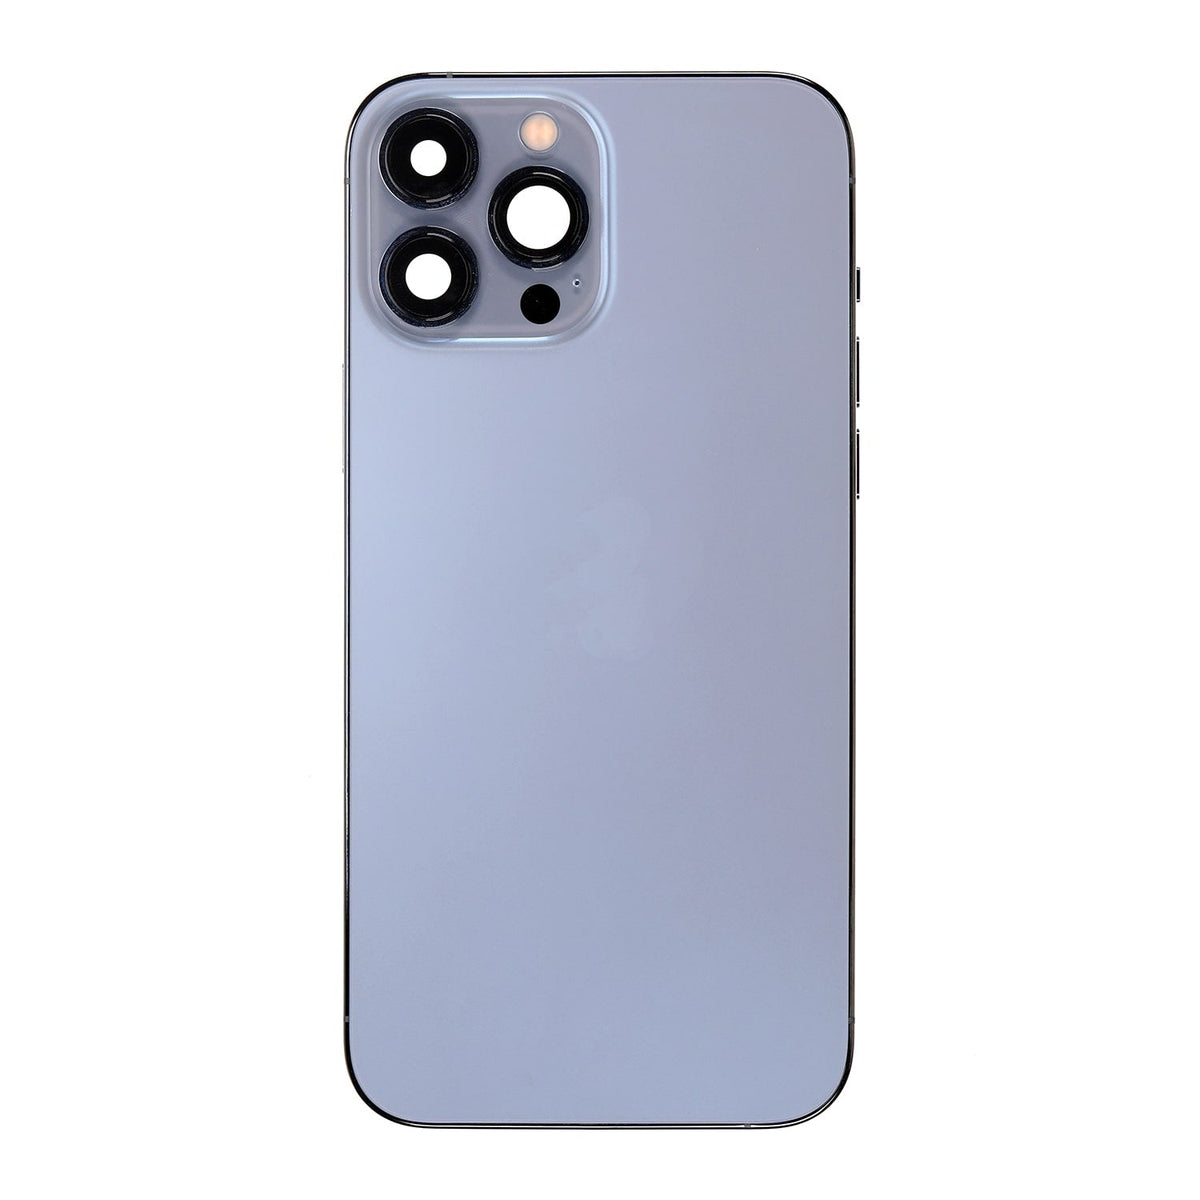 SIERRA BLUE BACK COVER FULL ASSEMBLY FOR IPHONE 13 PRO MAX